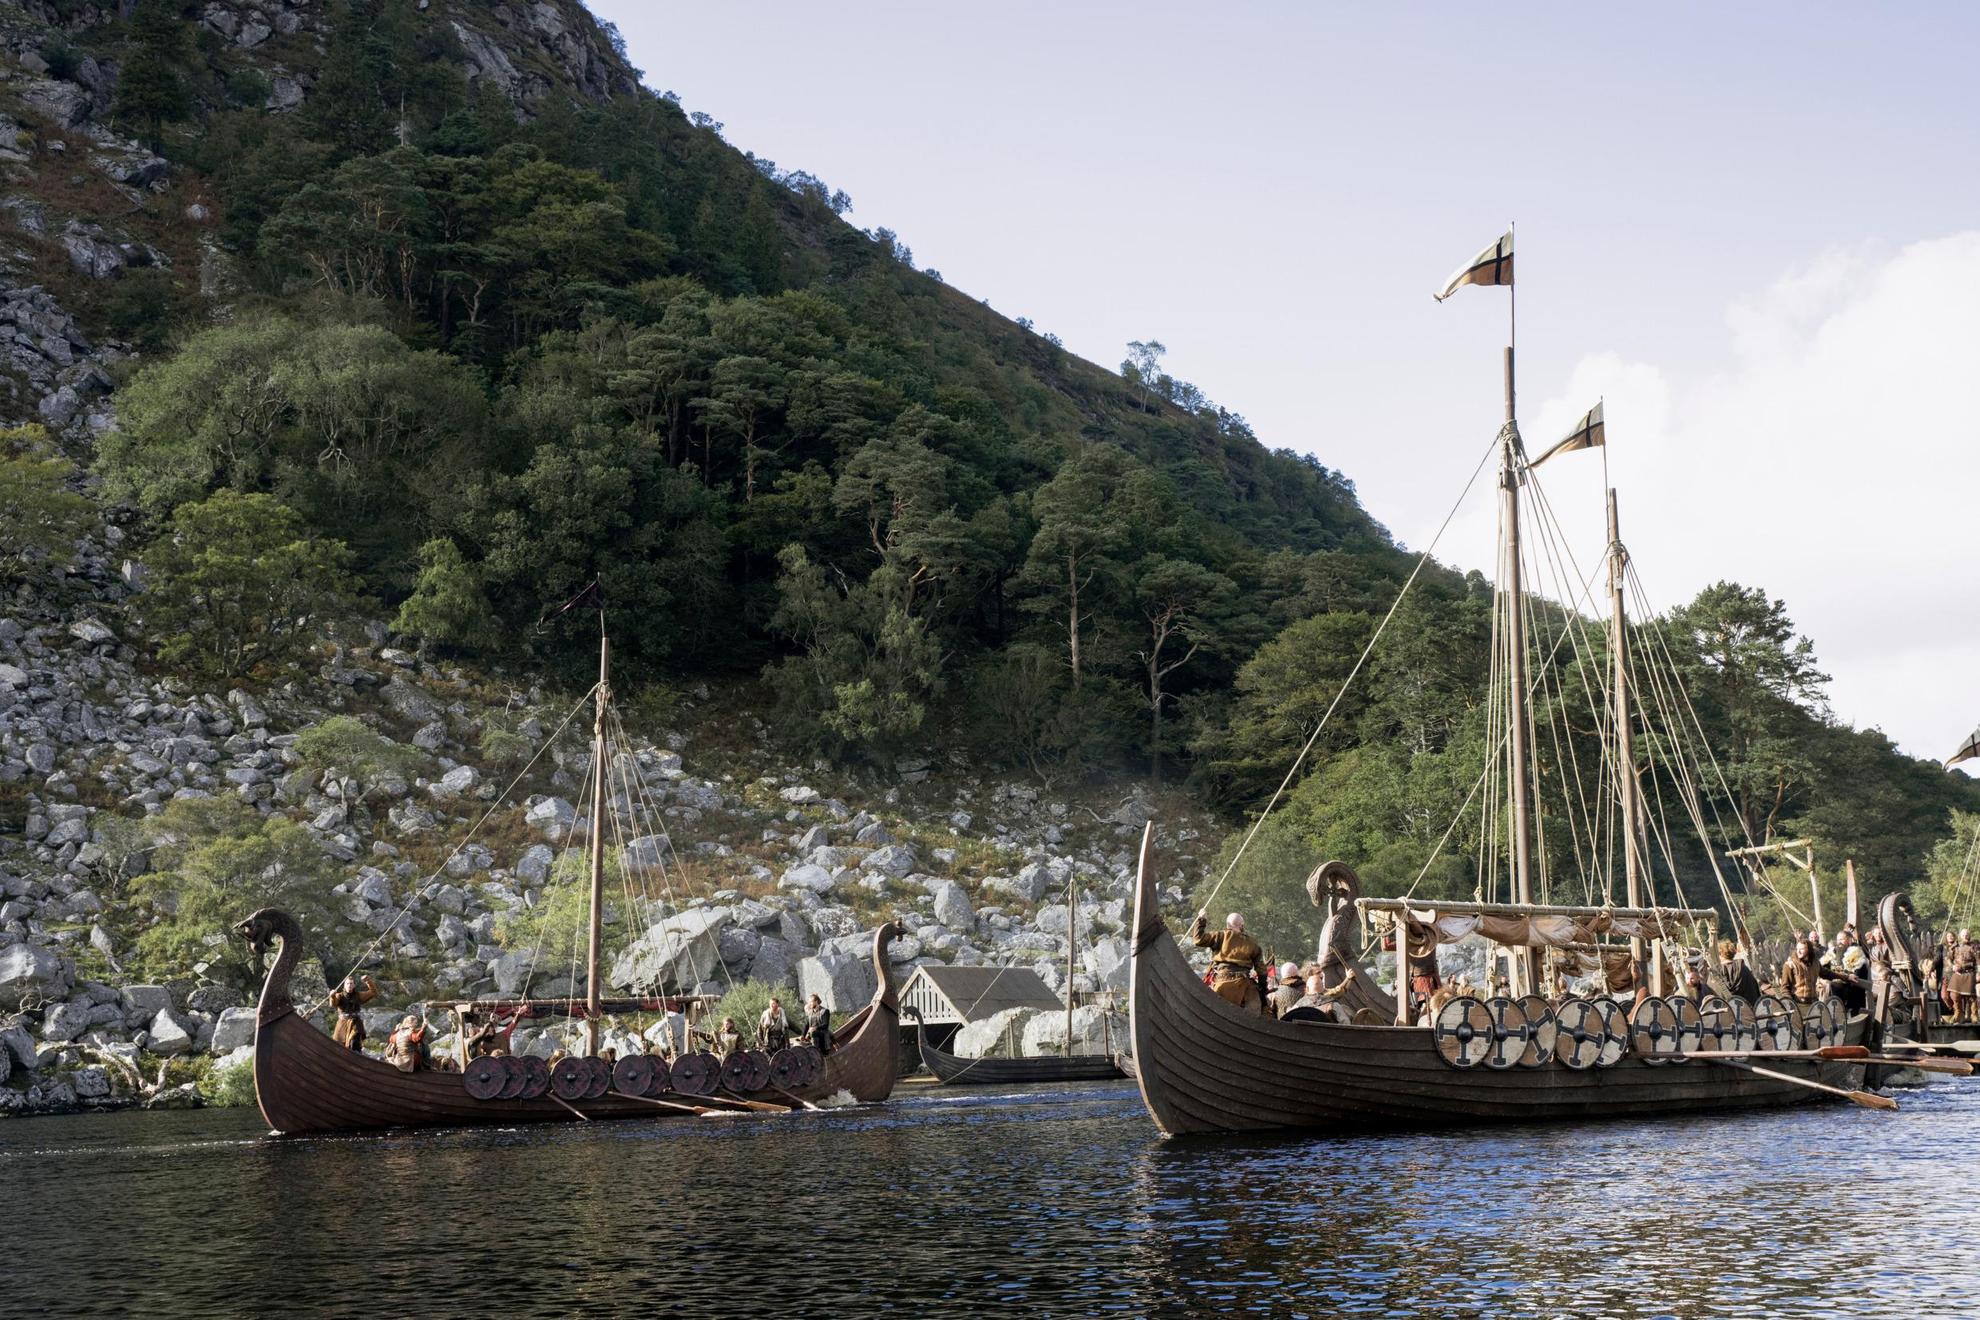 Vikings in viking boats. An image from the tv series Vikings: Valhalla.